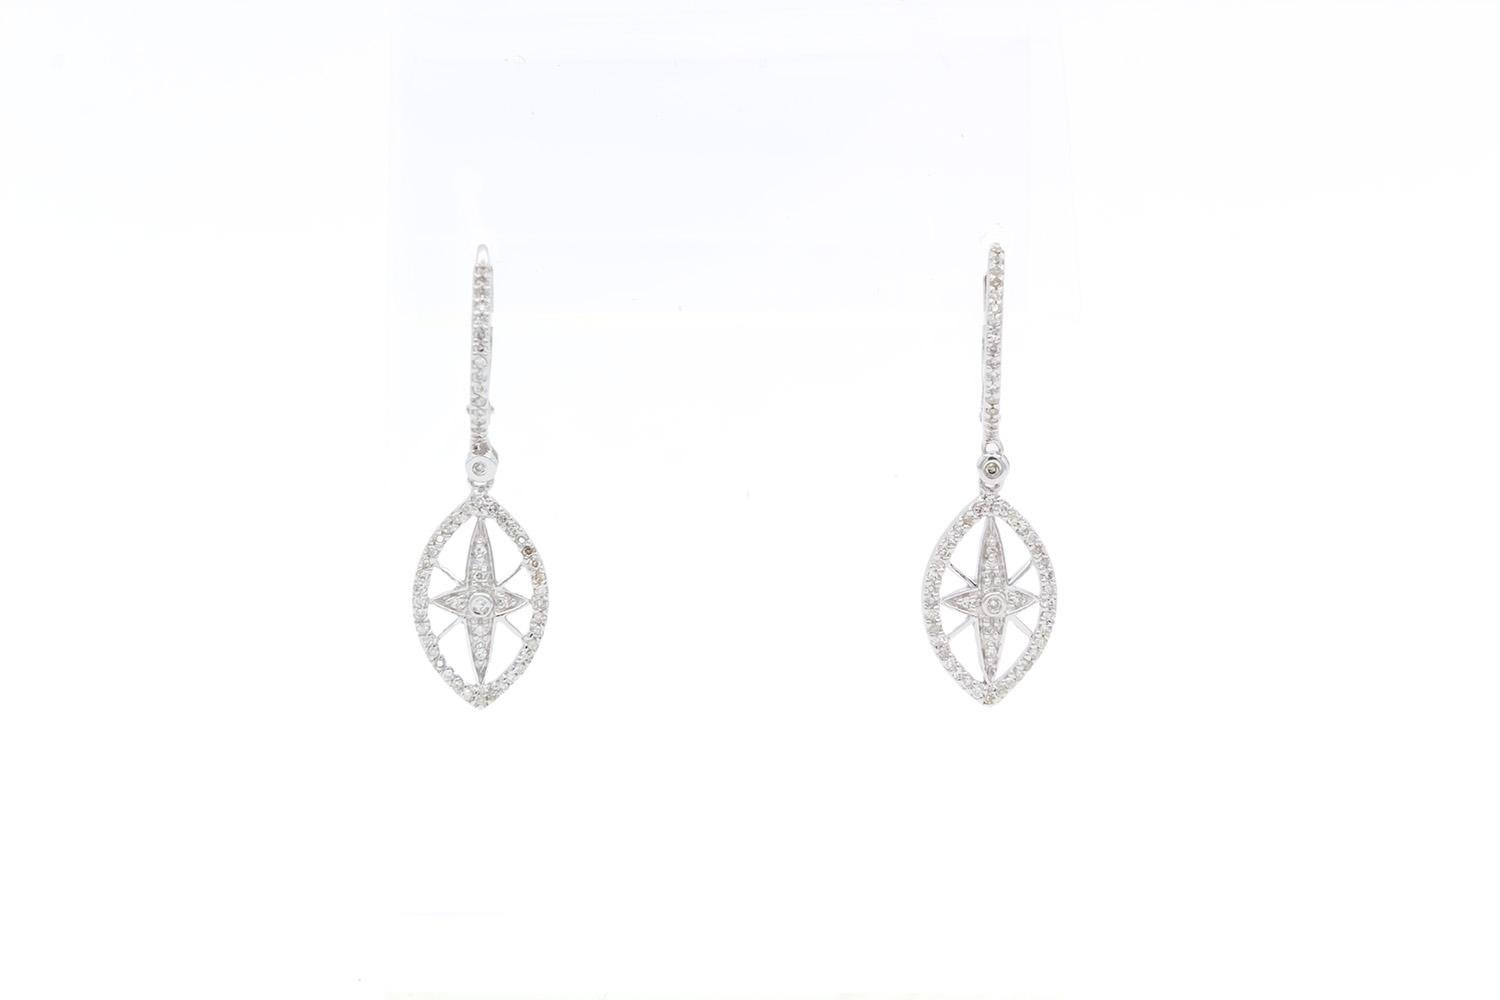 We are pleased to present these Ladies 14k White Gold & Diamond Dangle Drop Earrings. This elegant set of dangle earrings features a beautiful design set with and estimated 0.40ctw H-I/VS-SI Round Brilliant Cut Diamonds with a hinged backing. The